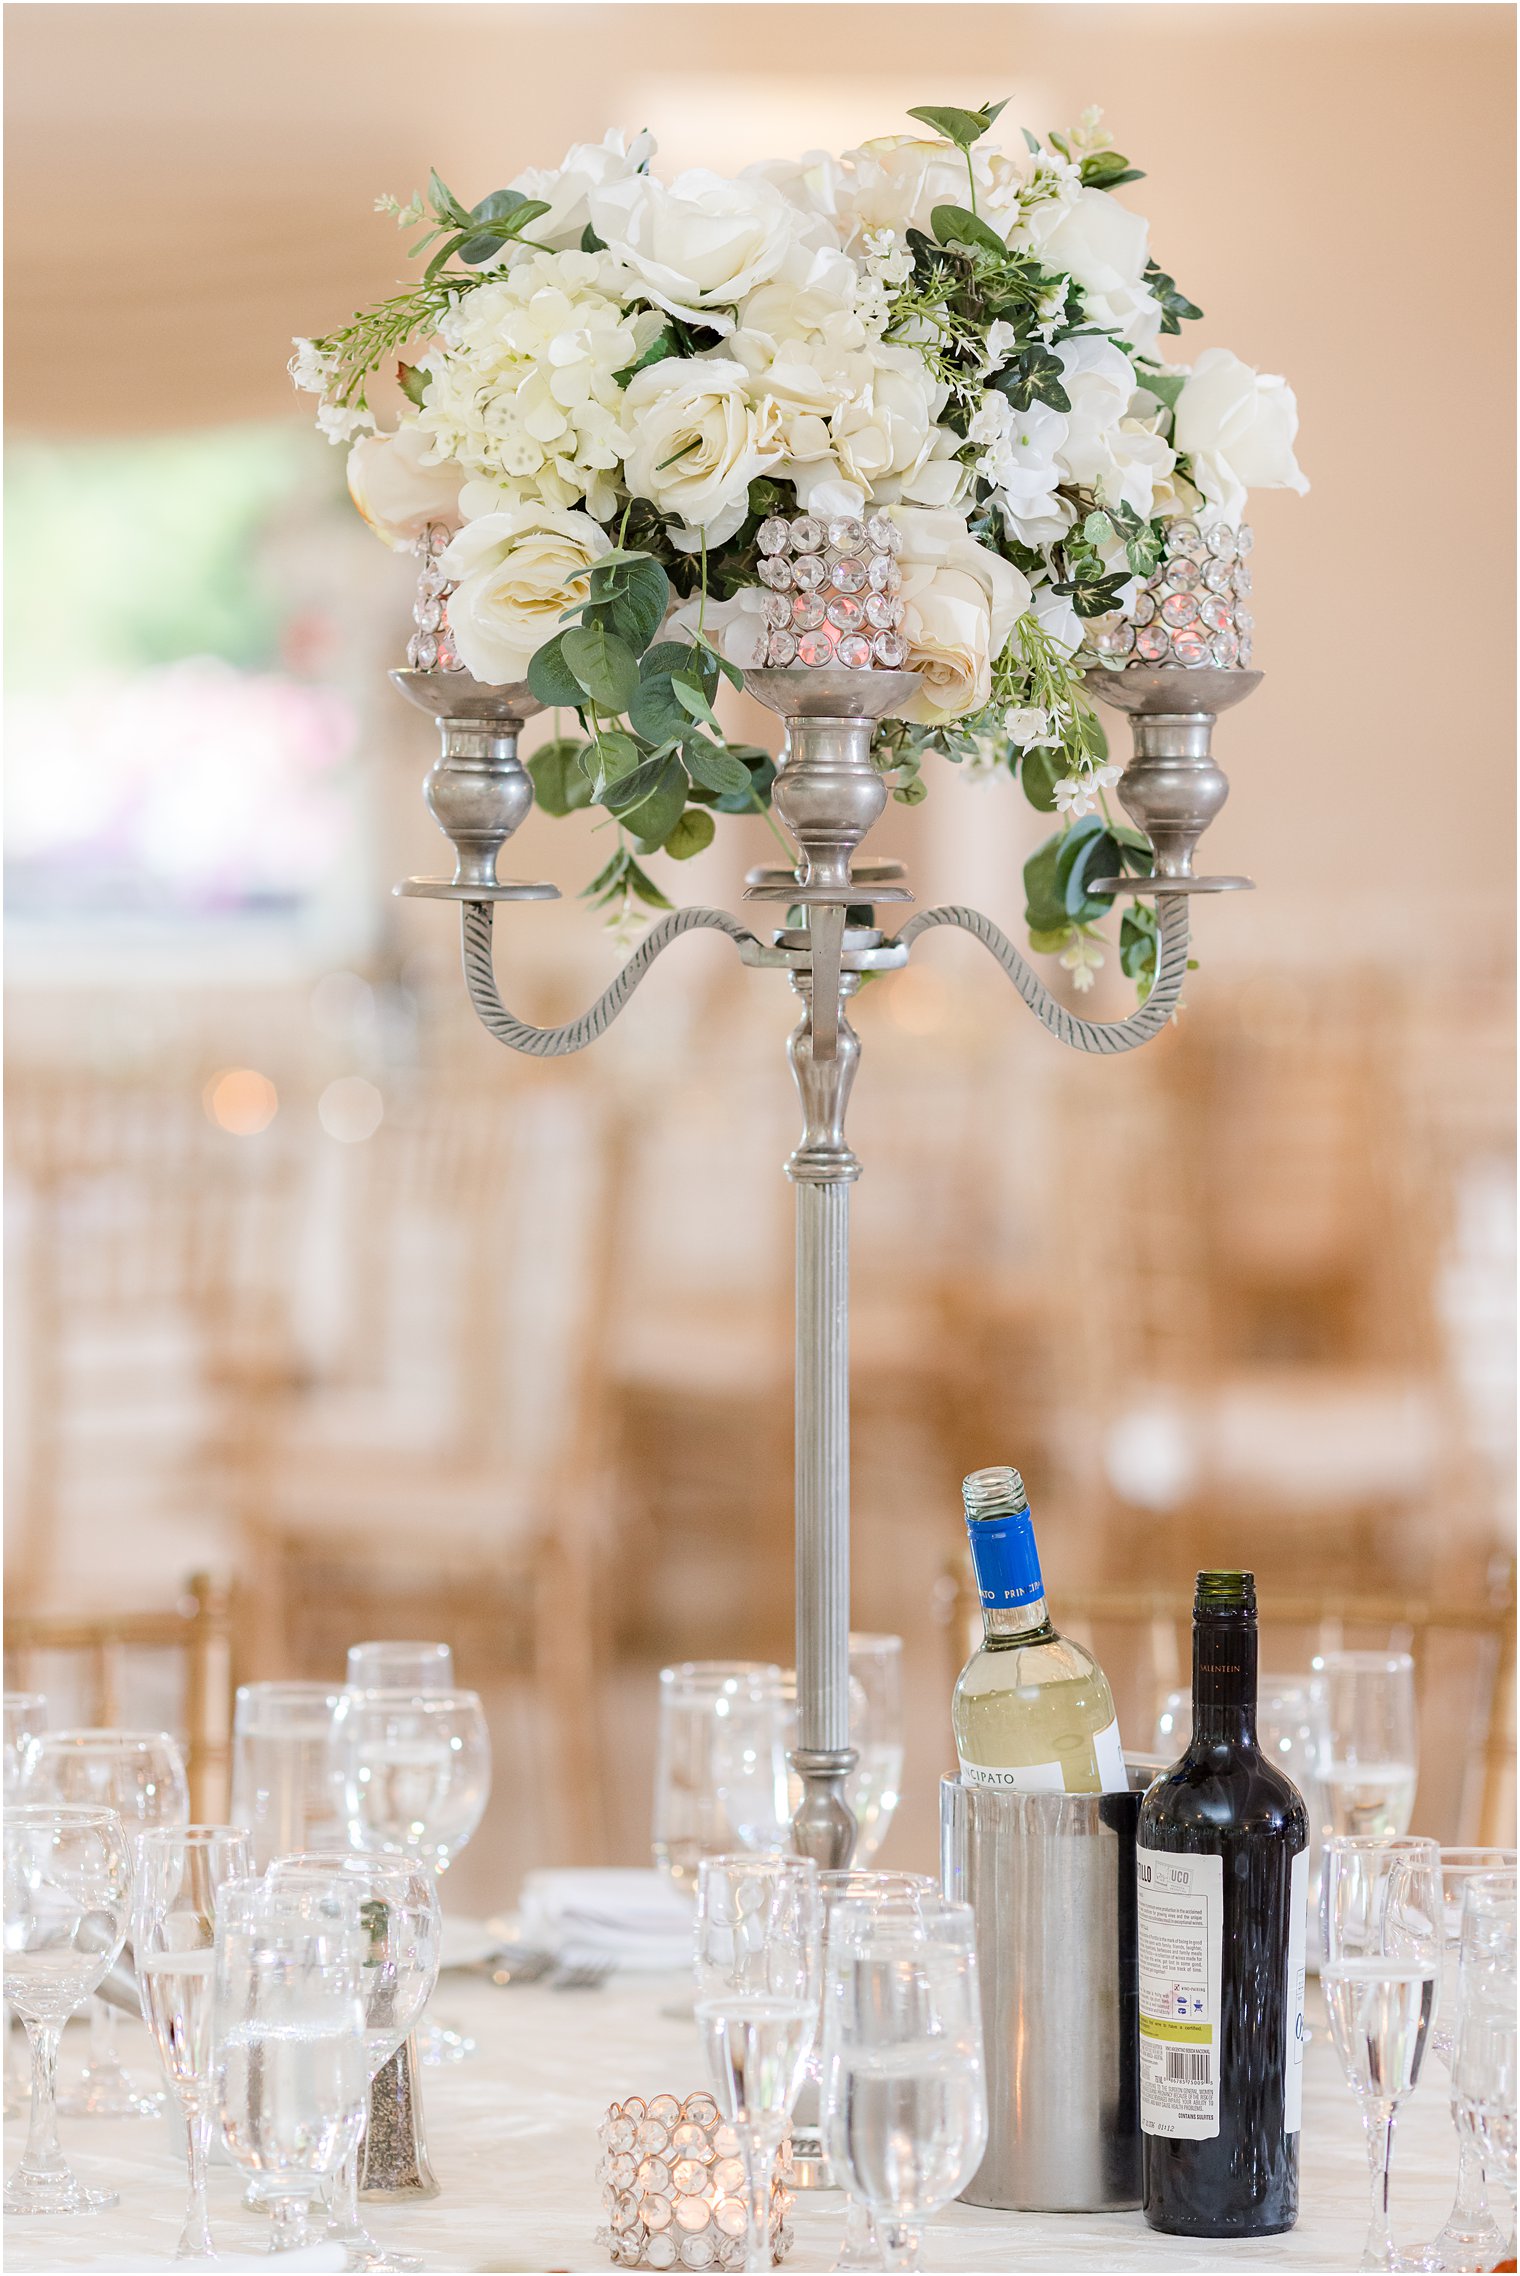 floral centerpiece with white roses and glass details for garden style wedding at The English Manor